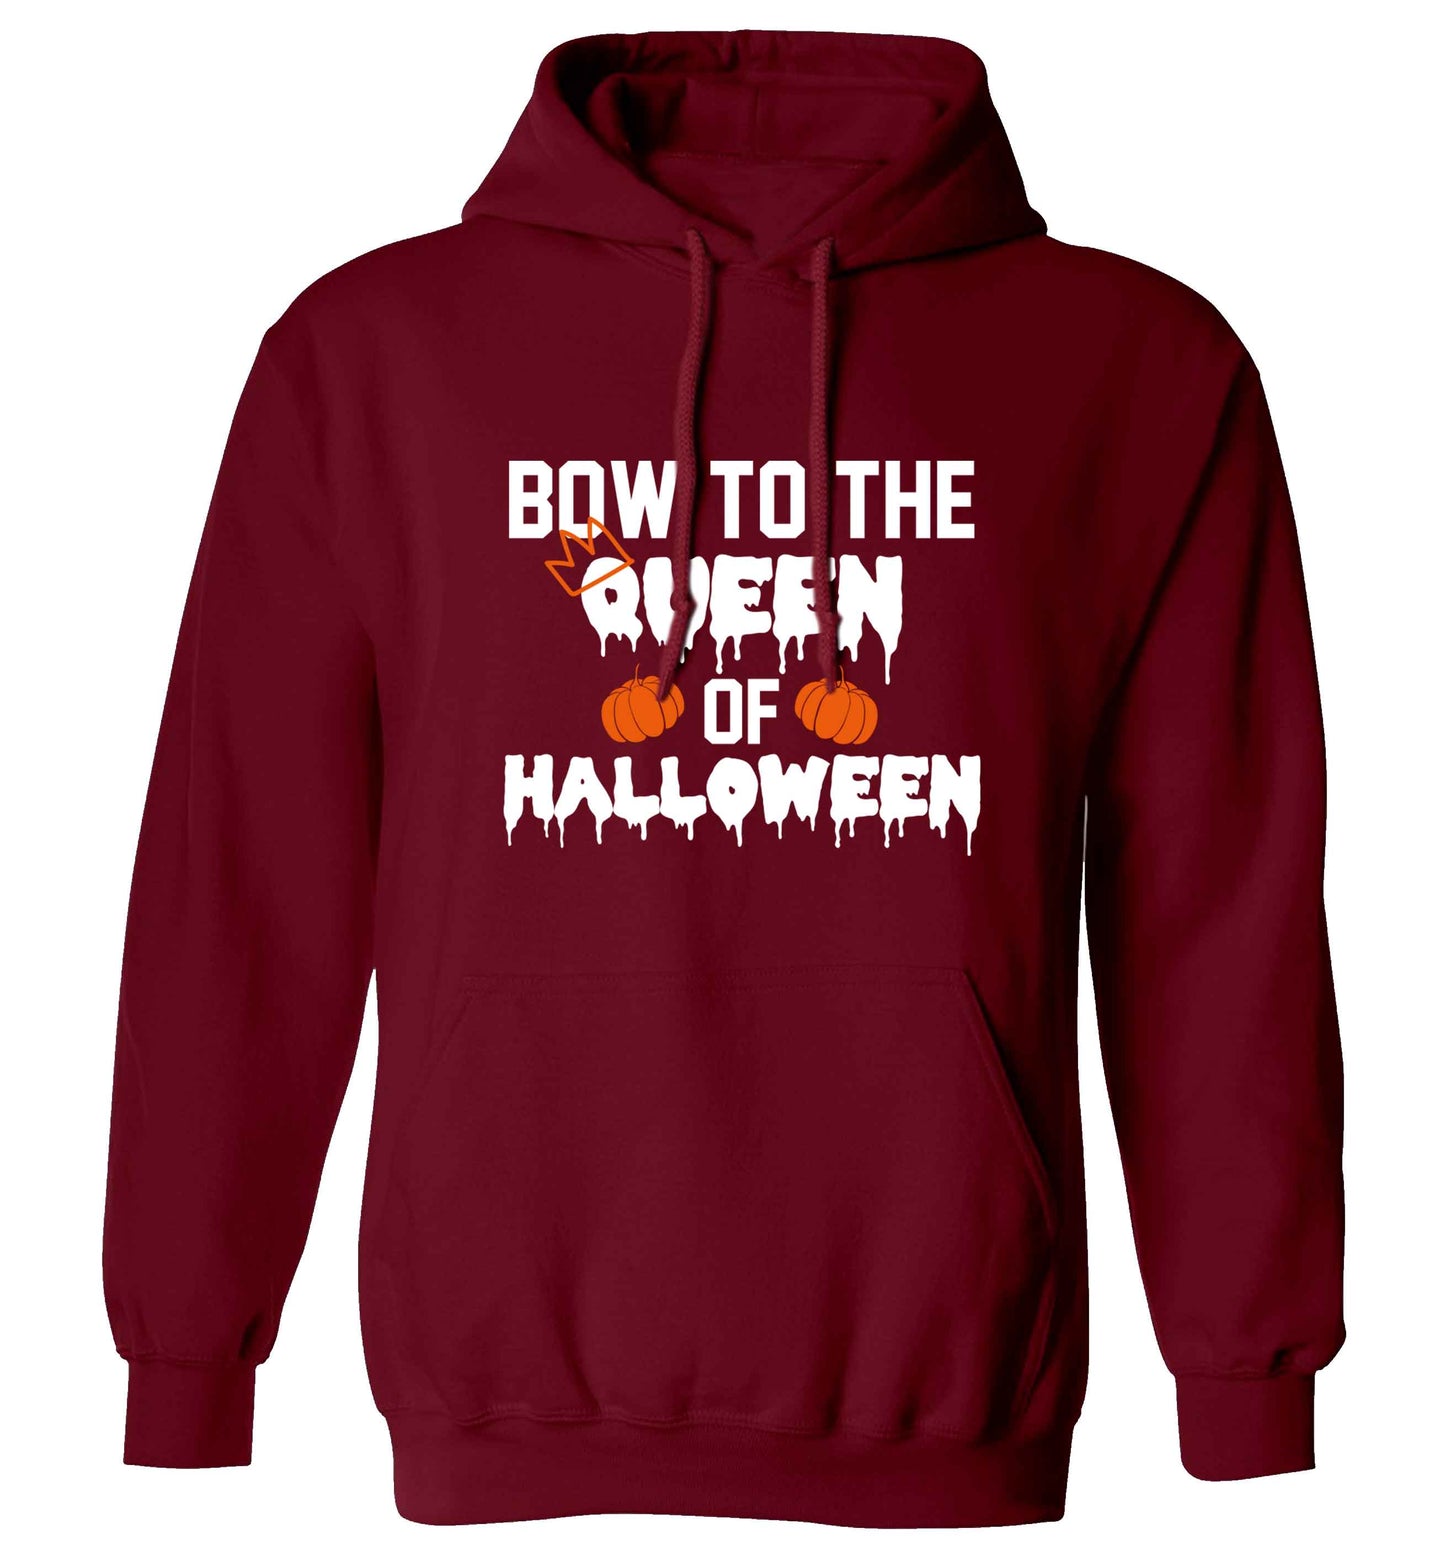 Bow to the Queen of halloween adults unisex maroon hoodie 2XL